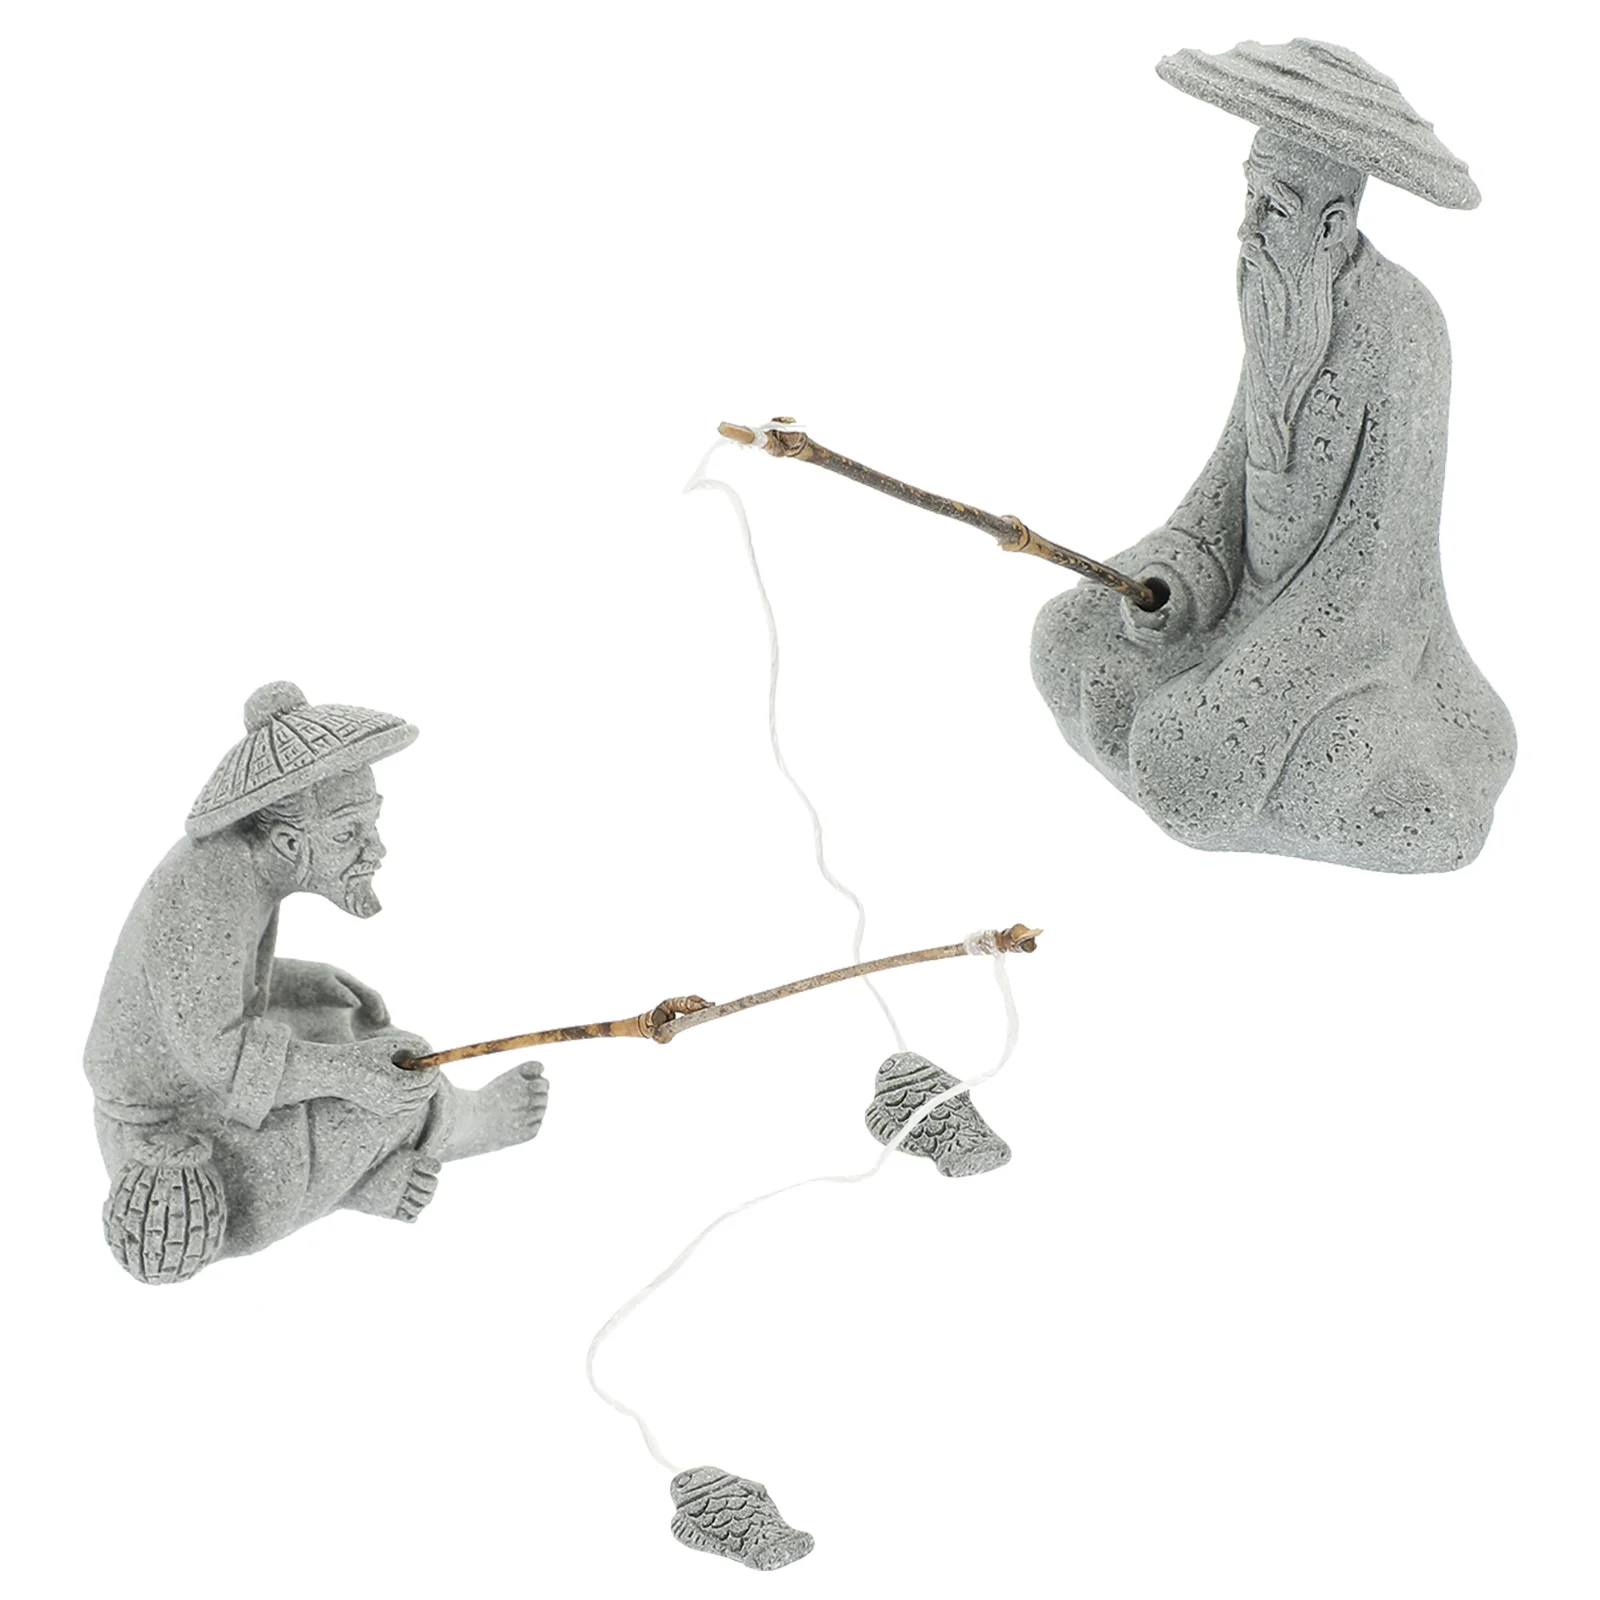 

Accessories Garden Action Figures Party Supplies Asian Decorationsations Fisherman For Pond Sculpture for Decor Statue